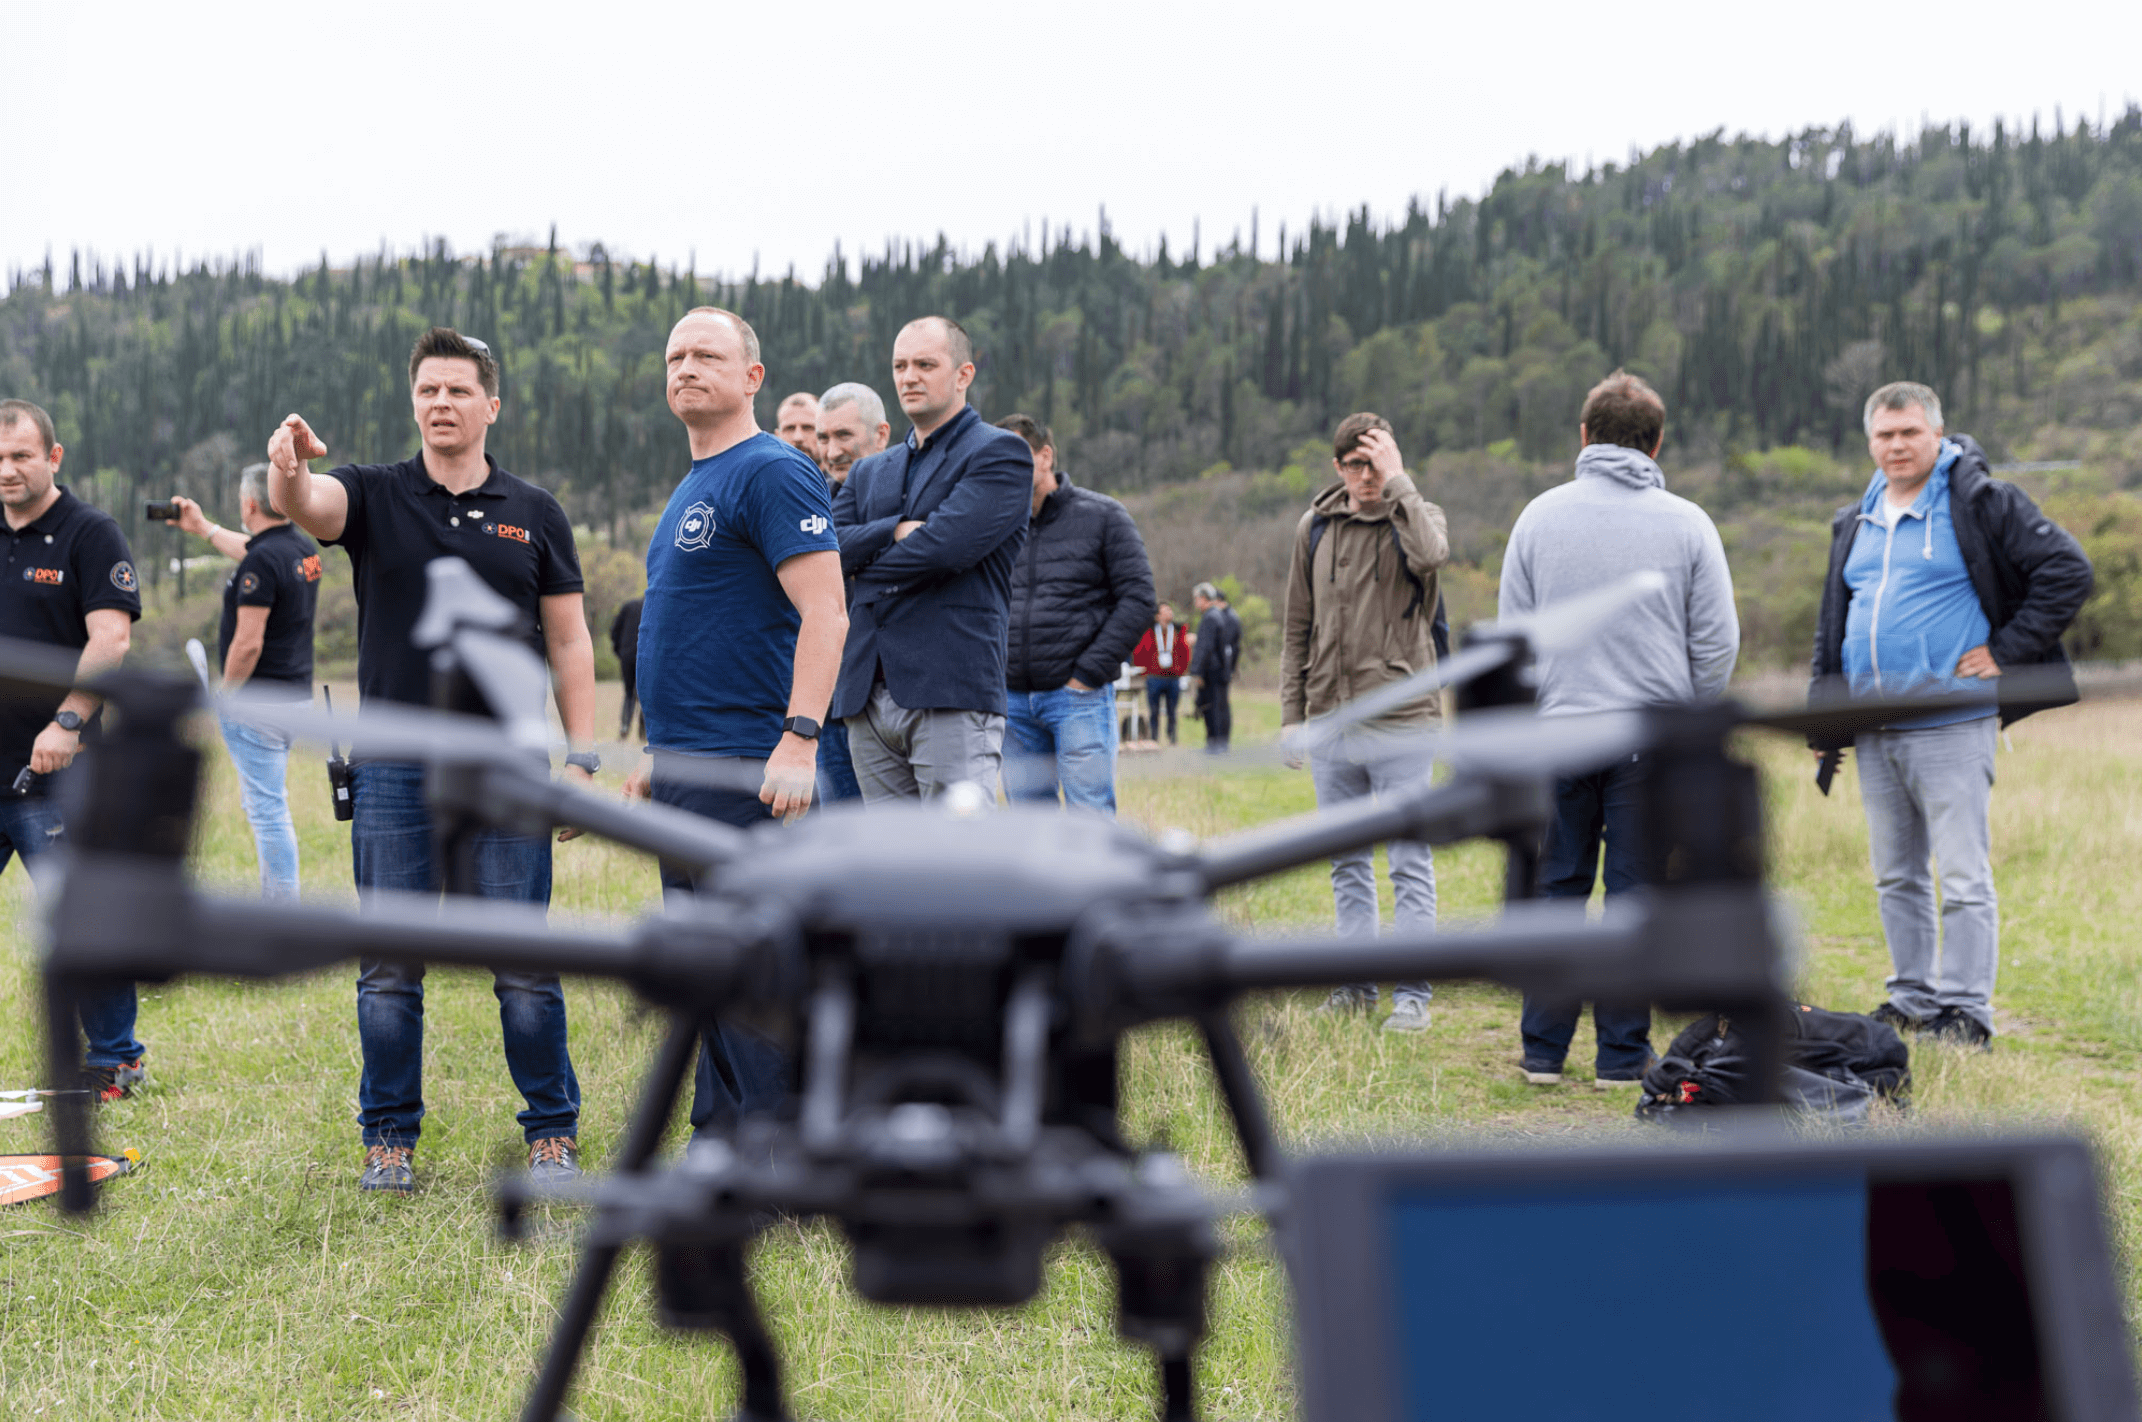 Romeo Durscher with EU first responders at drone rescue scene